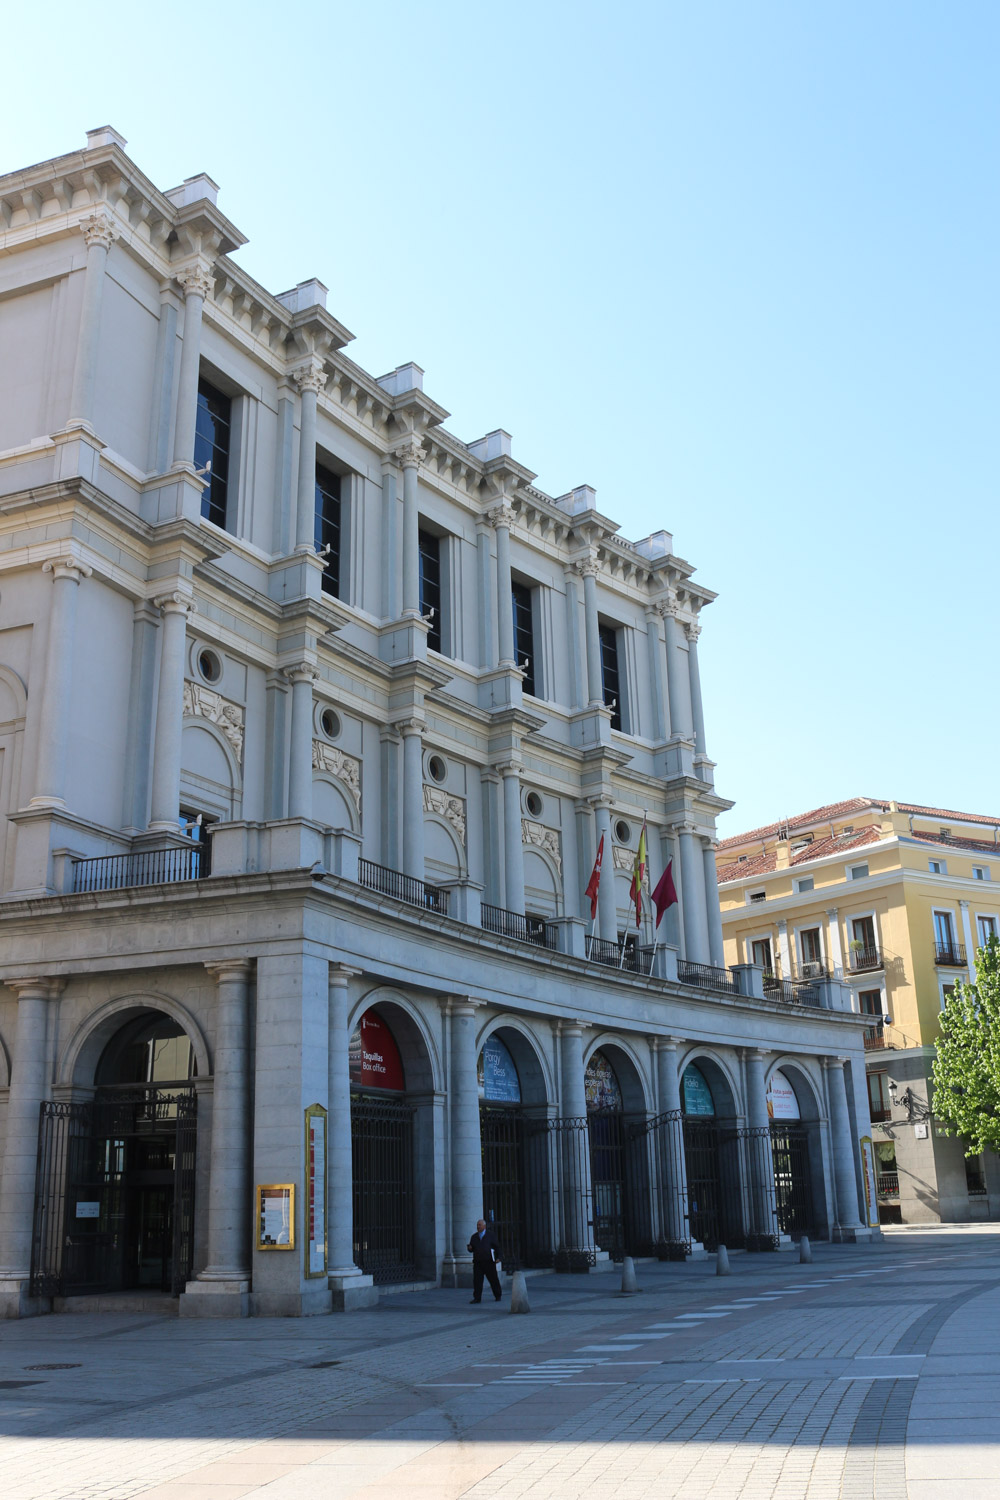 Main entrance of Teatro Real (Royal Theatre)